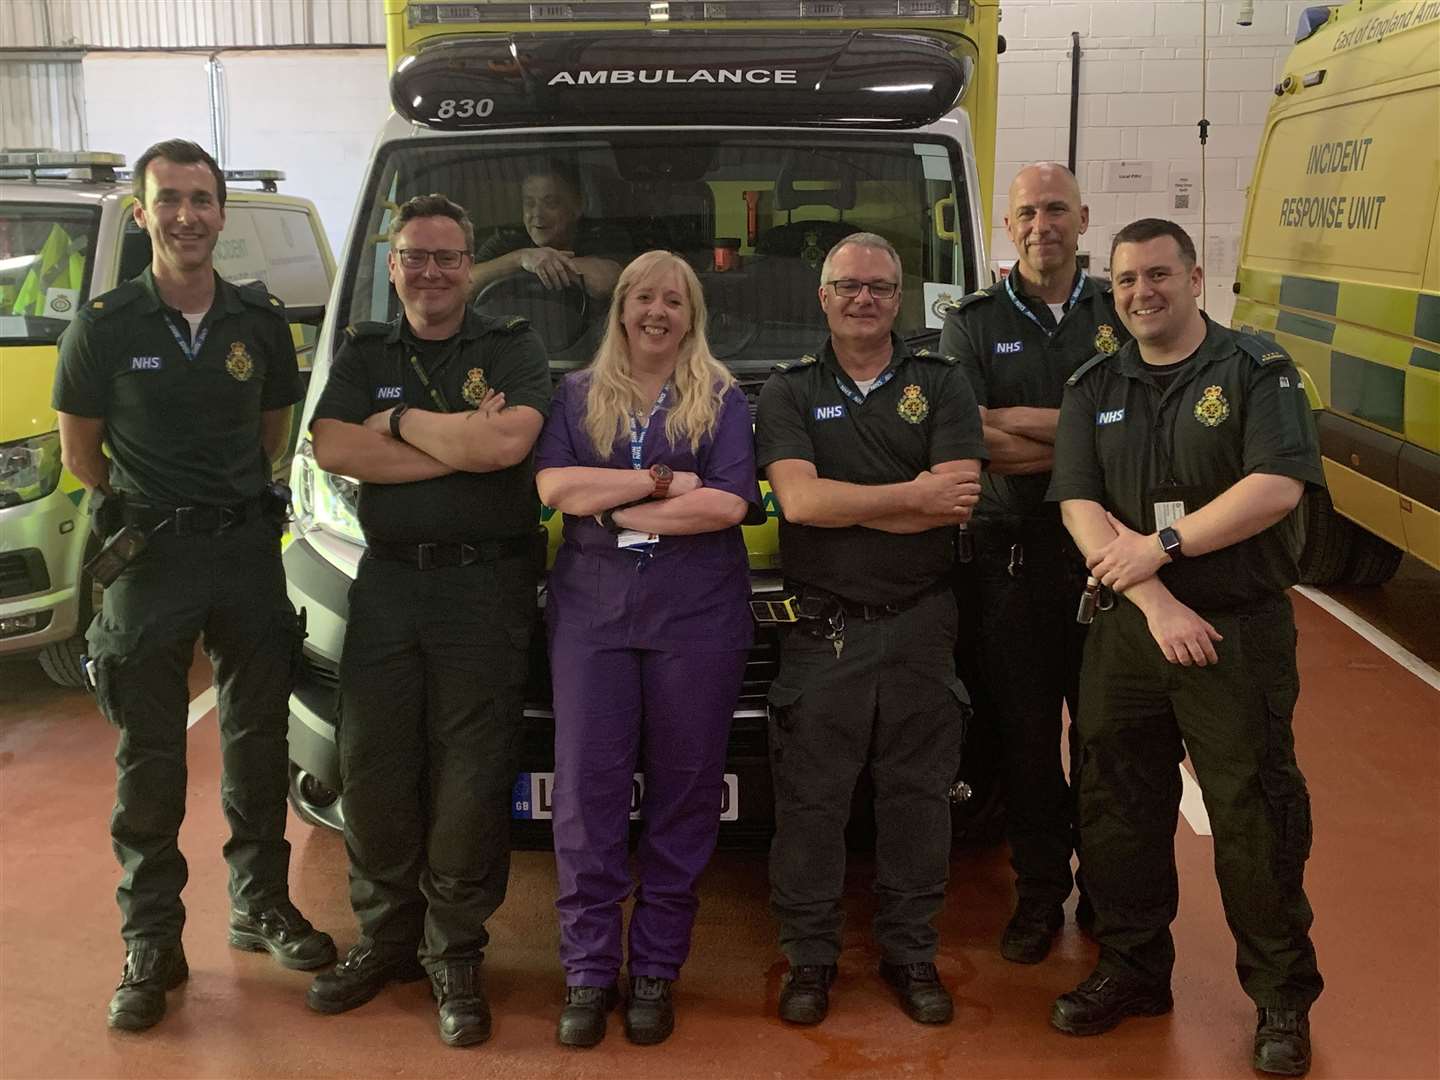 Anne-Louise Muir, a Dornoch native now working near Cambridge, with other members of her paramedic team, all of whom have been supplied with scrubs by a team of local sewers.